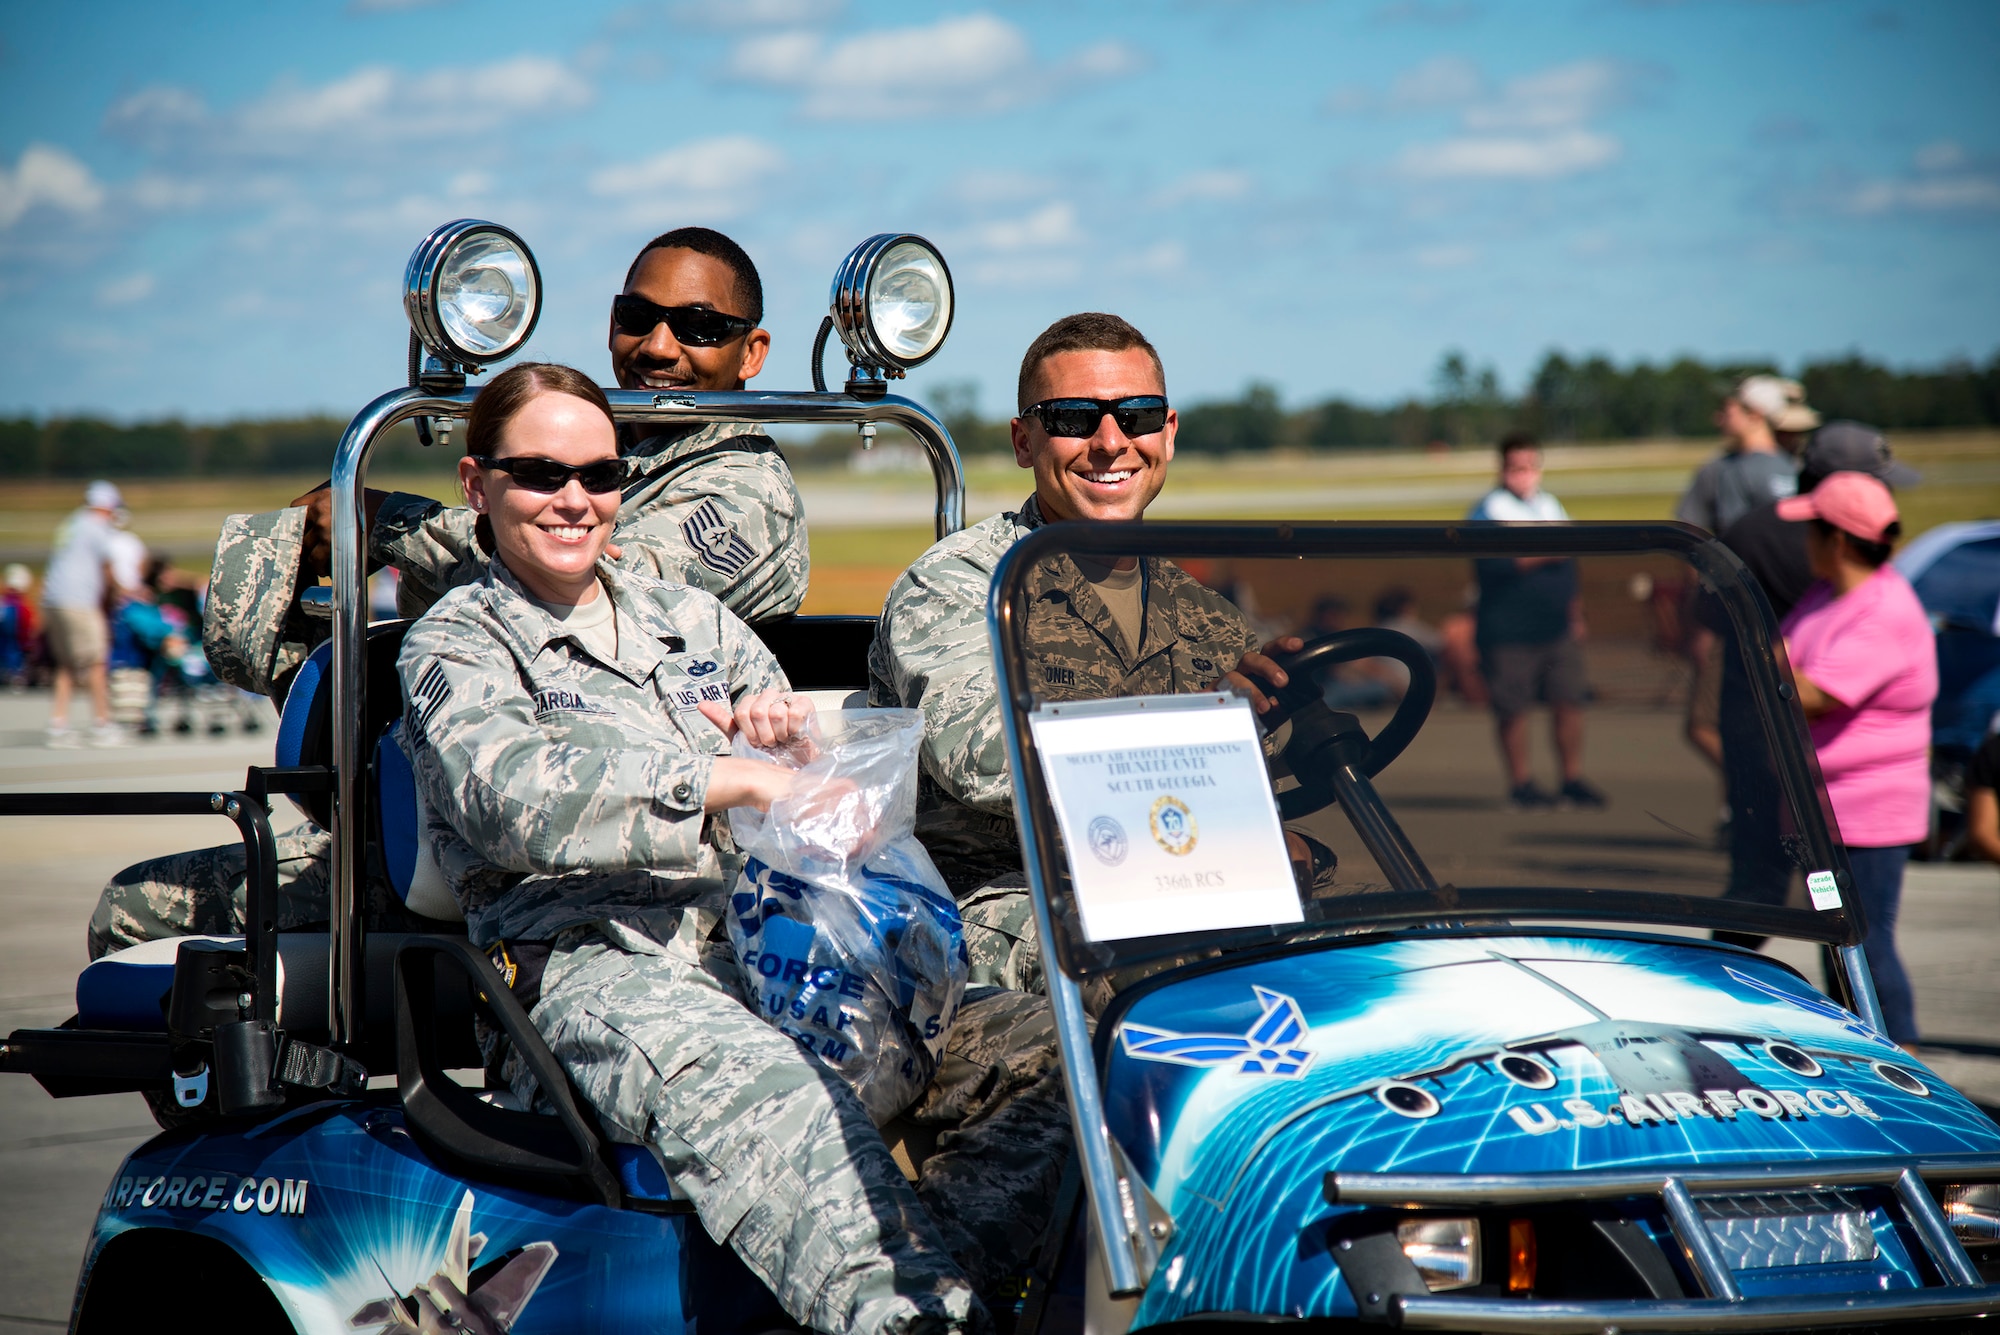 Airmen from the 336th Recruiting Squadron pose for a photo during the Thunder Over South Georgia Air Show, Oct. 28, 2017, at Moody Air Force Base, Ga. The air show is an opportunity for Moody to thank the local community for all its support, and exhibit air power. (U.S. Air Force photo by Airman 1st Class Erick Requadt)